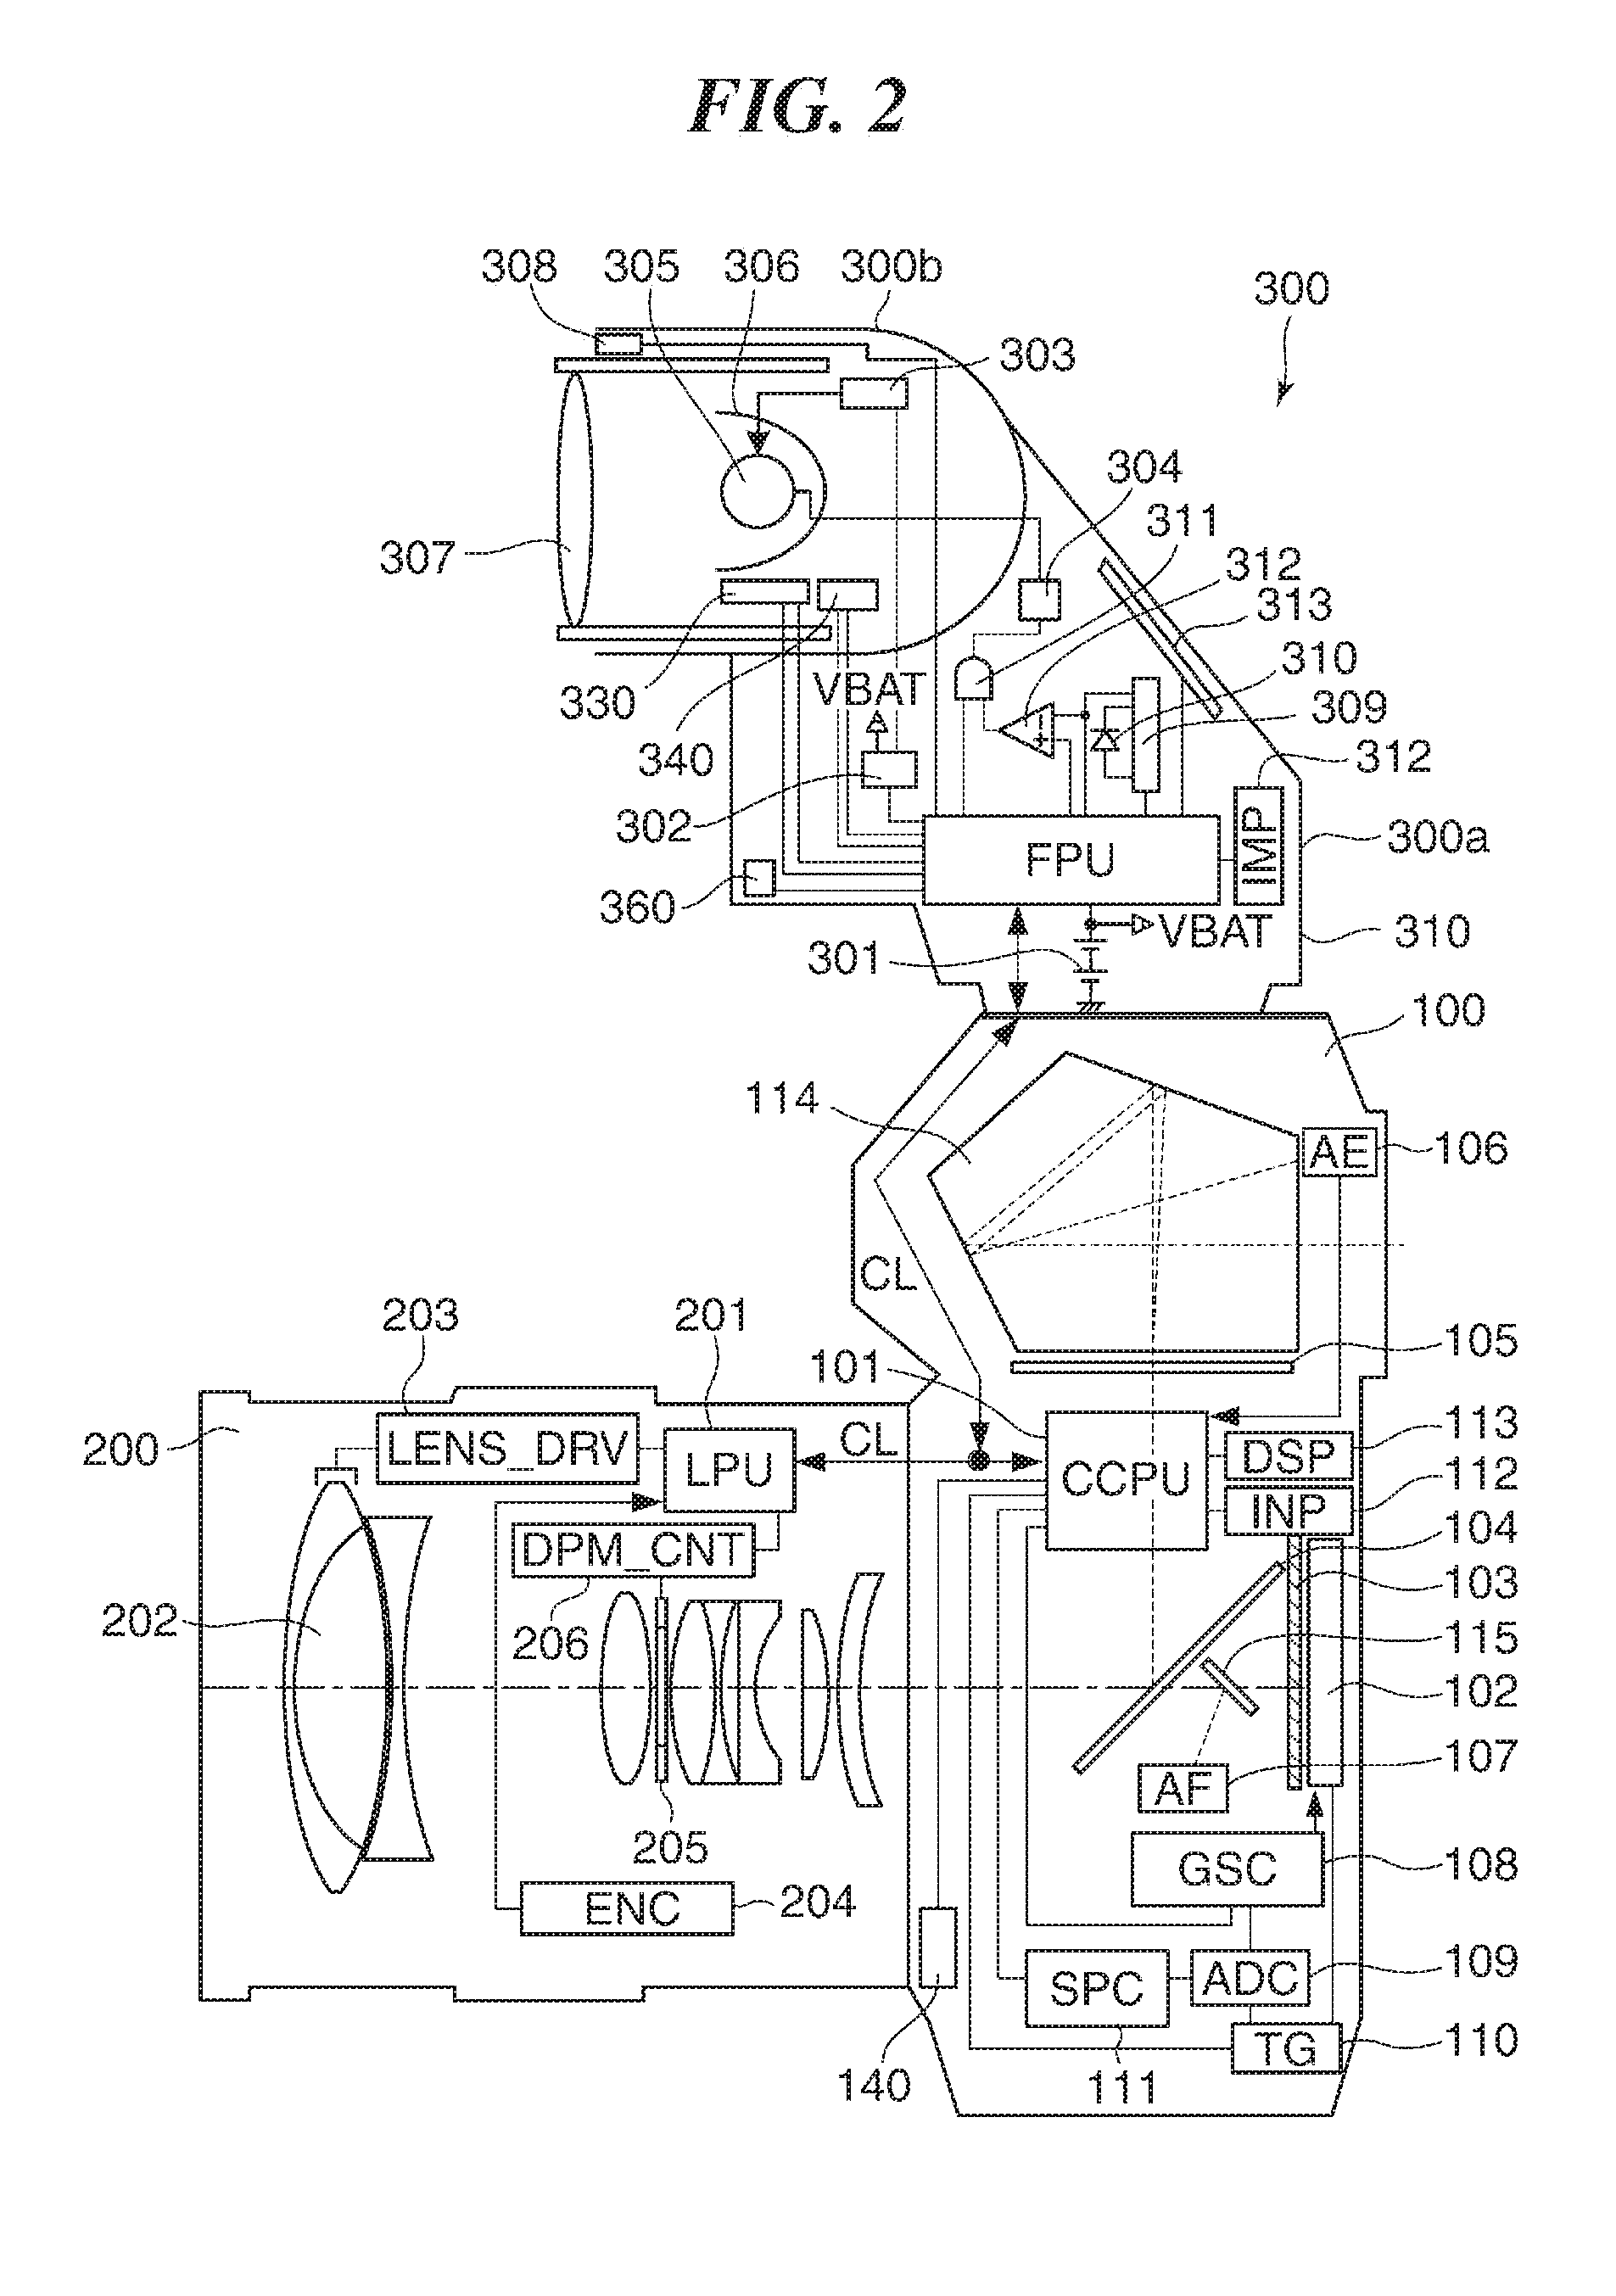 Image pickup apparatus that is capable of bounce emission photographing, control method therefor, and storage medium storing control program therefor